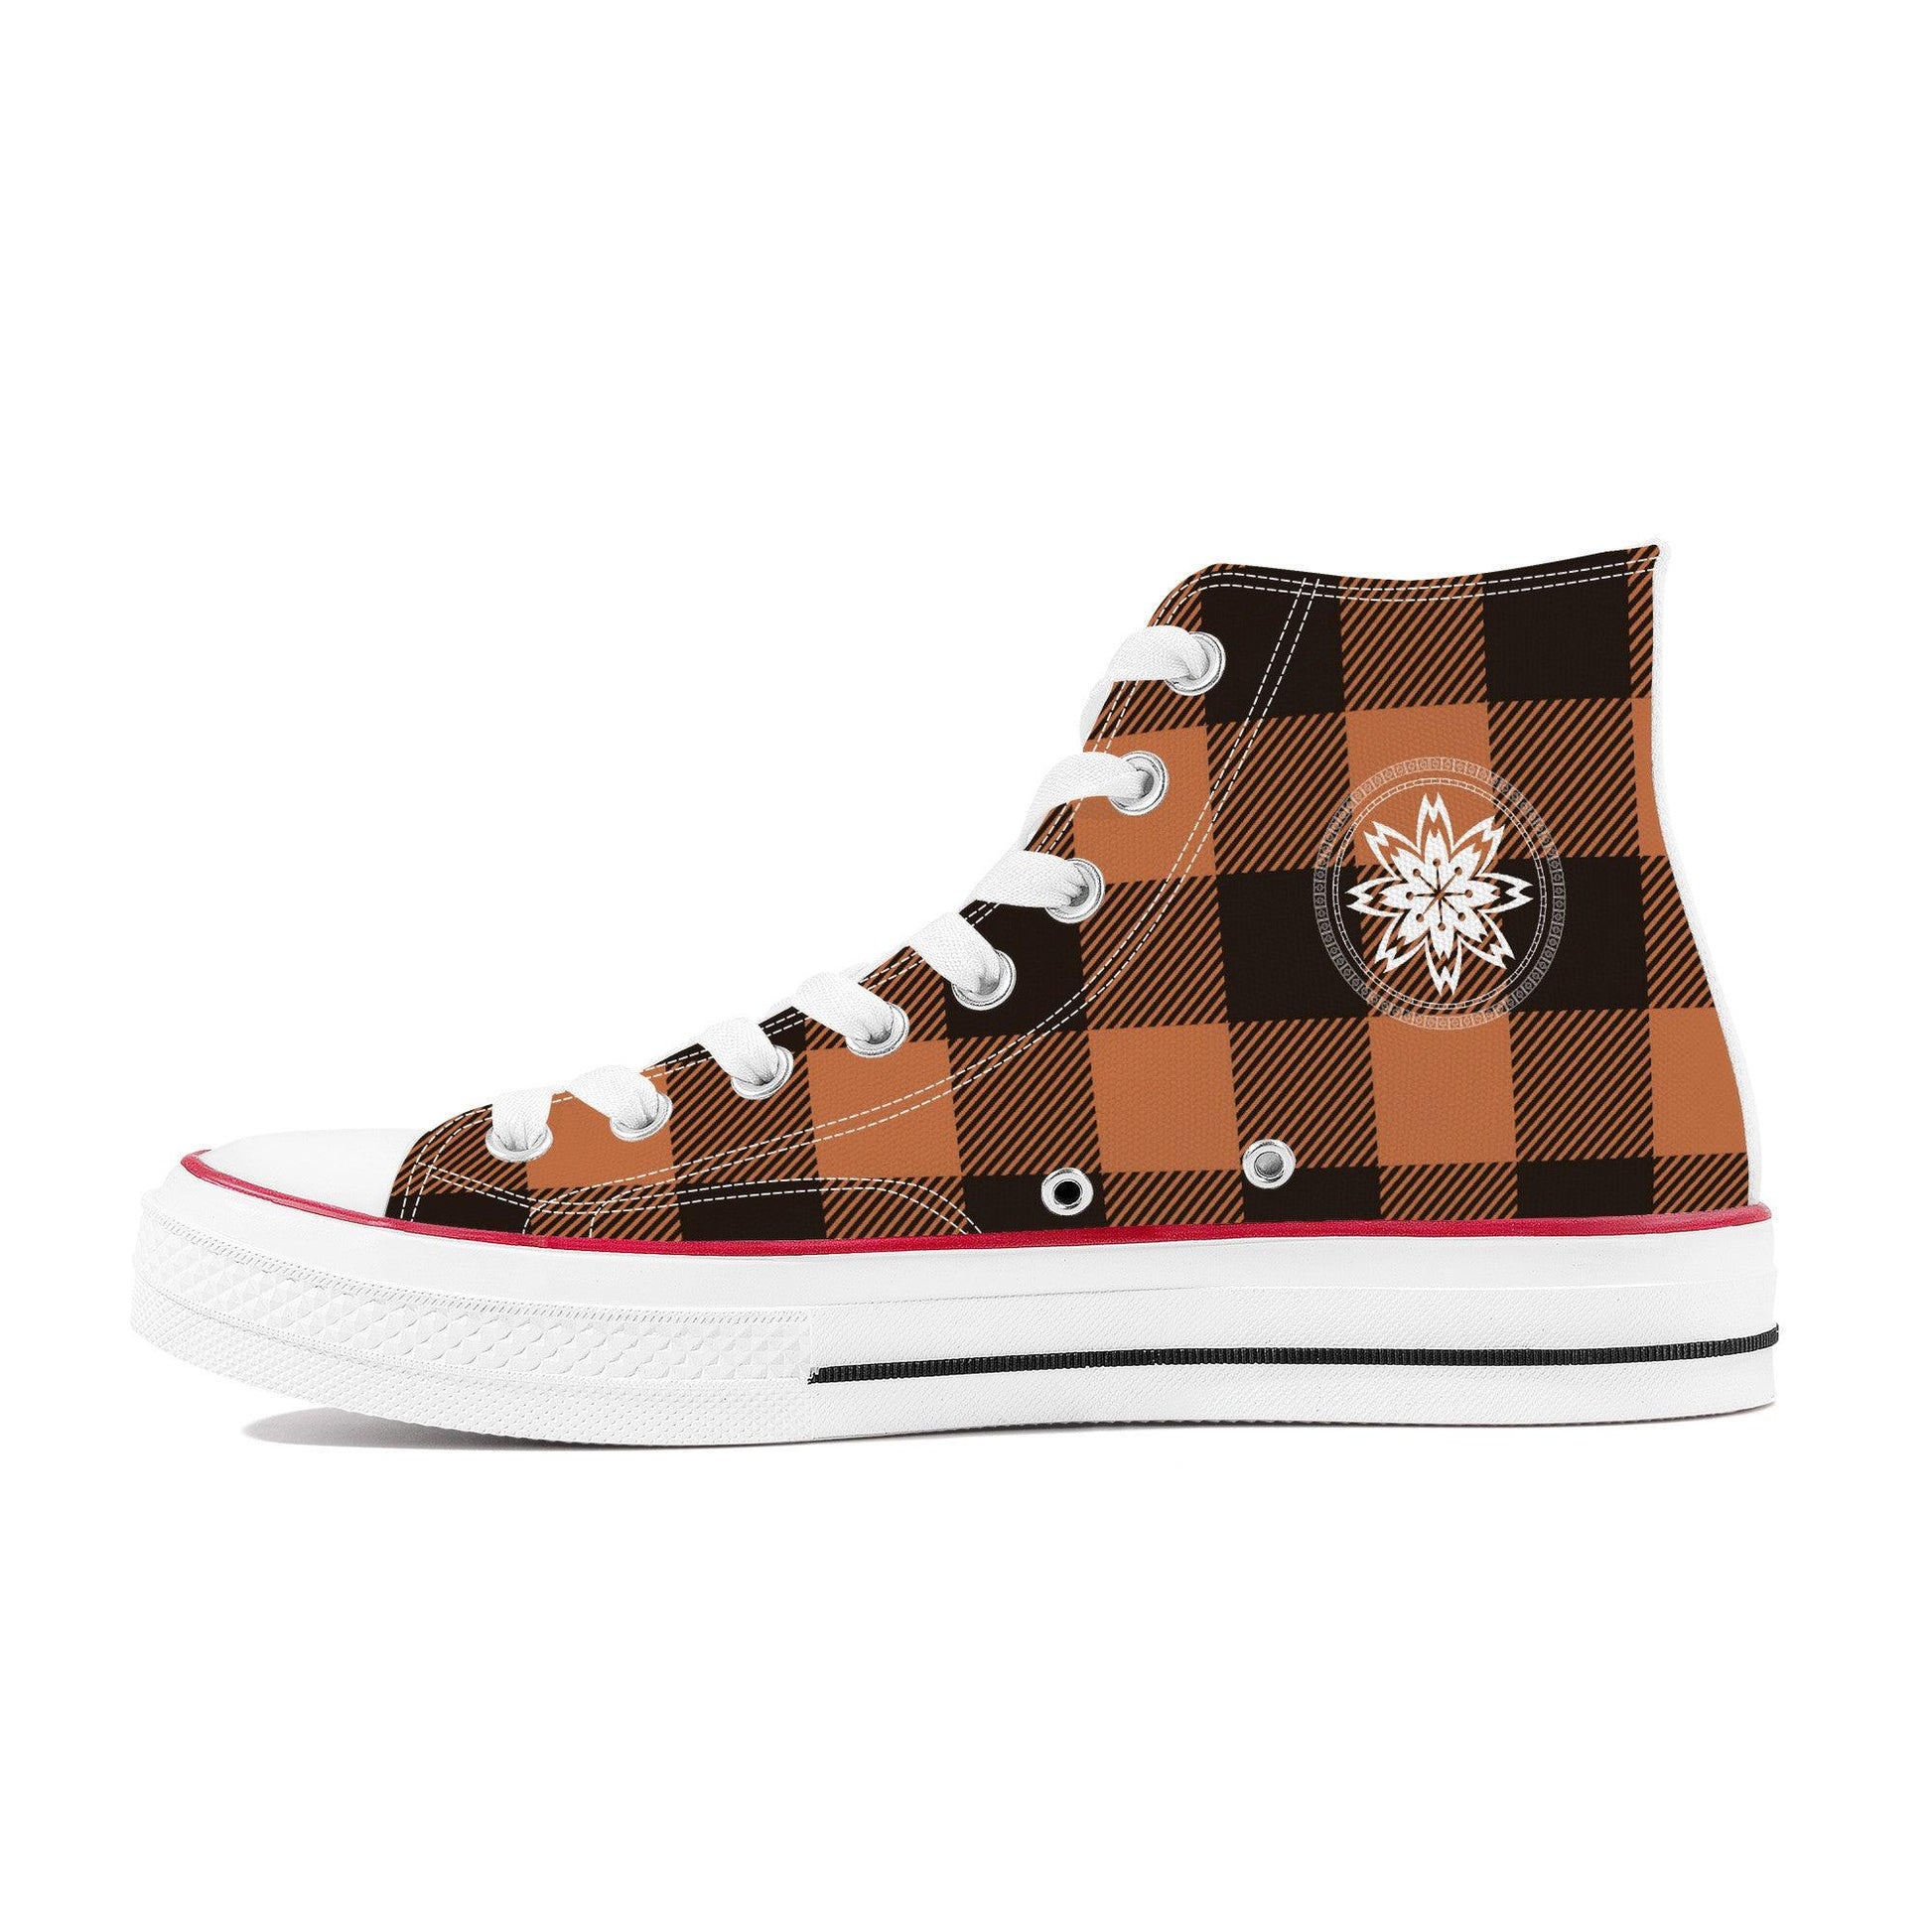 Brown & Black Checkers - High Top Canvas Shoes - Kaito Japan Design 